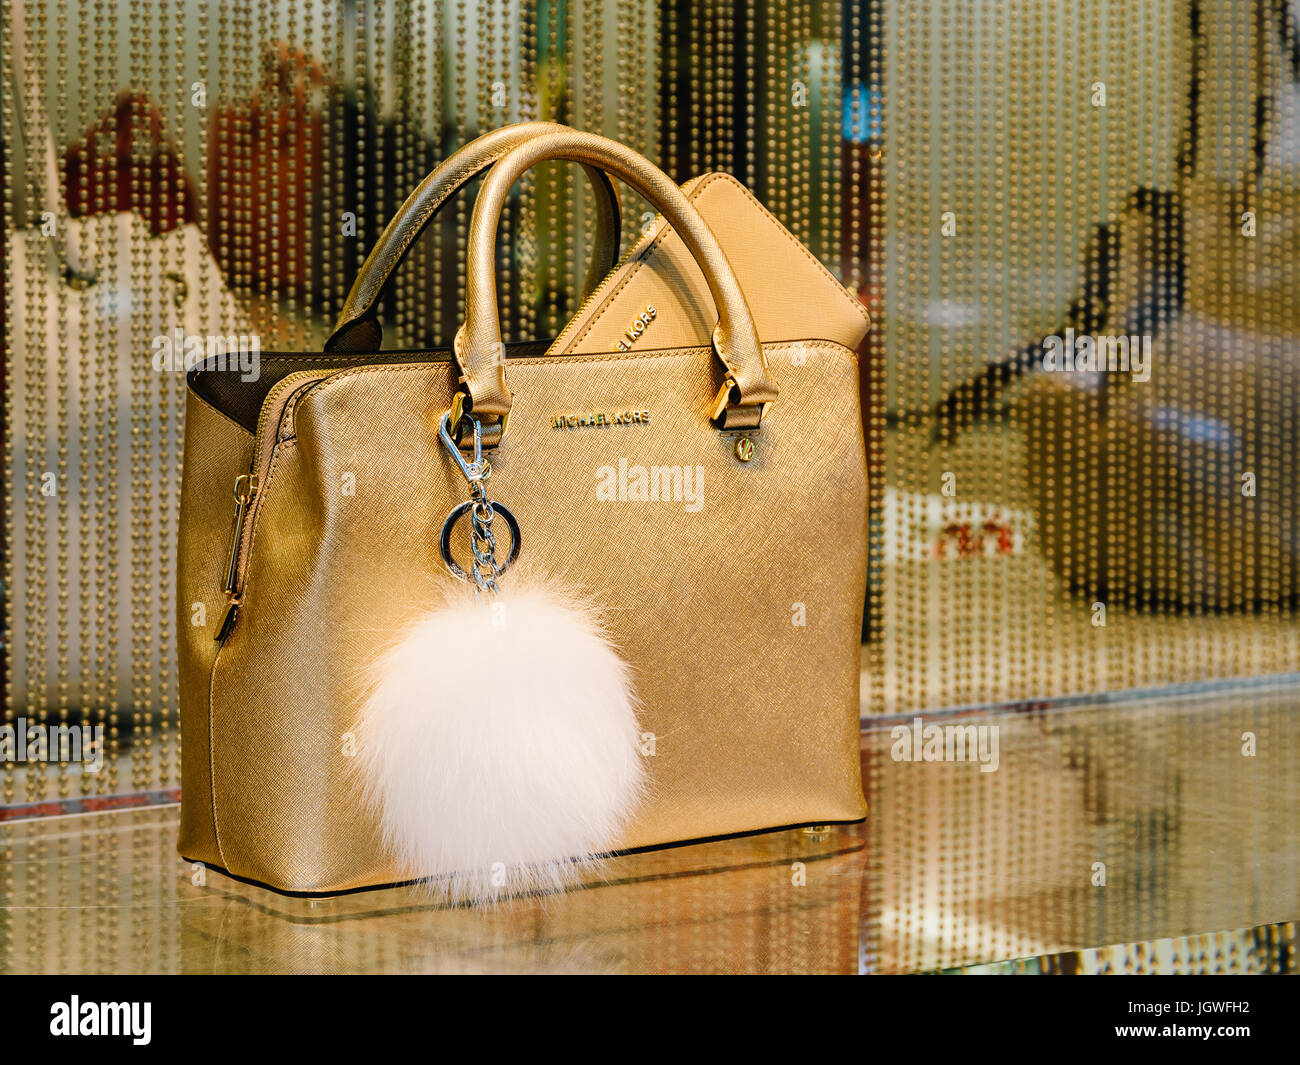 VALENCIA, SPAIN - AUGUST 06, 2016: Michael Kors bag for sale in beauty  store Stock Photo - Alamy